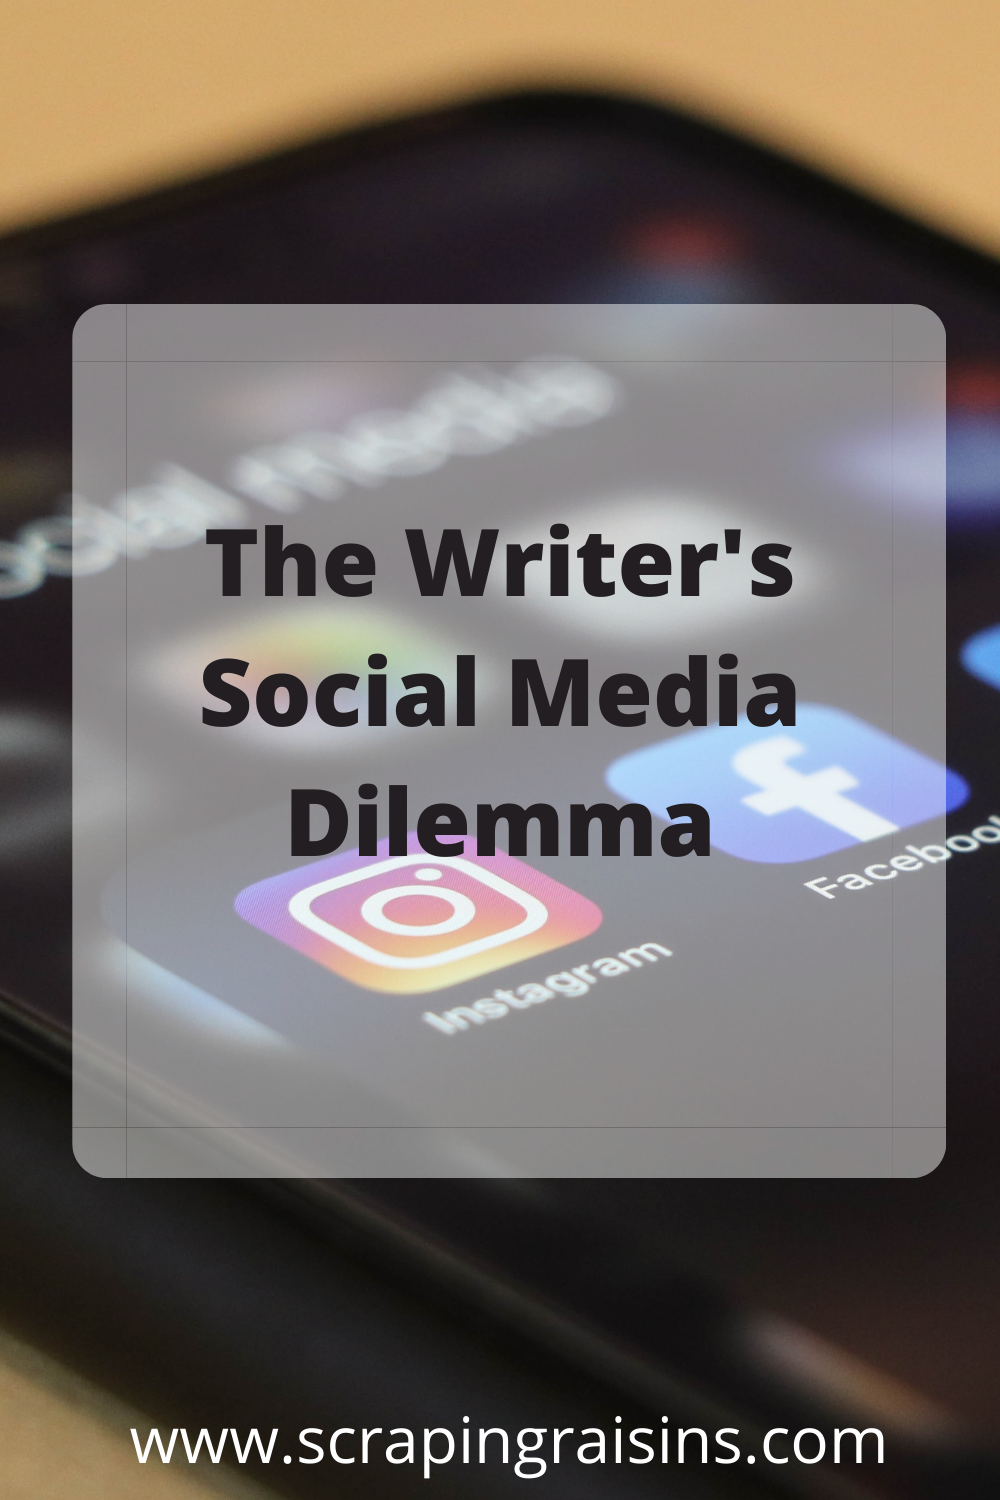 The Writer's Social Media Dilemma: Does the requirement to rack up followers and develop a brand and persona on social media strip down the soul of the artist beyond recognition? What’s the opportunity cost of bleeding out on social media? #thesocialdilemma #socialmedia #writersandsocialmedia